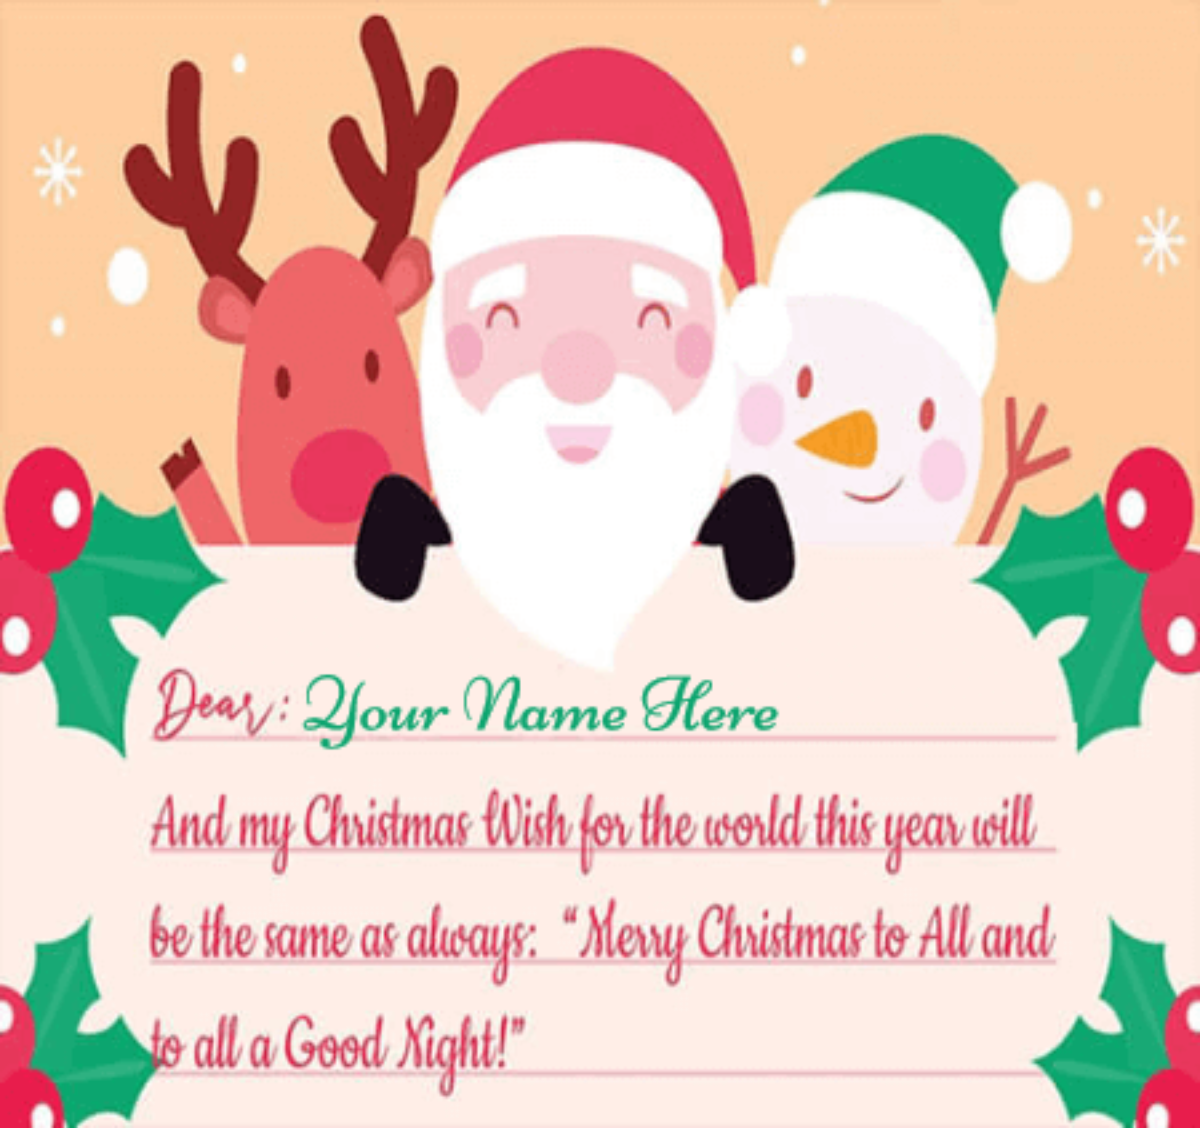 Cute Christmas Wishes For Loved Ones - Christmas Wishes With Name